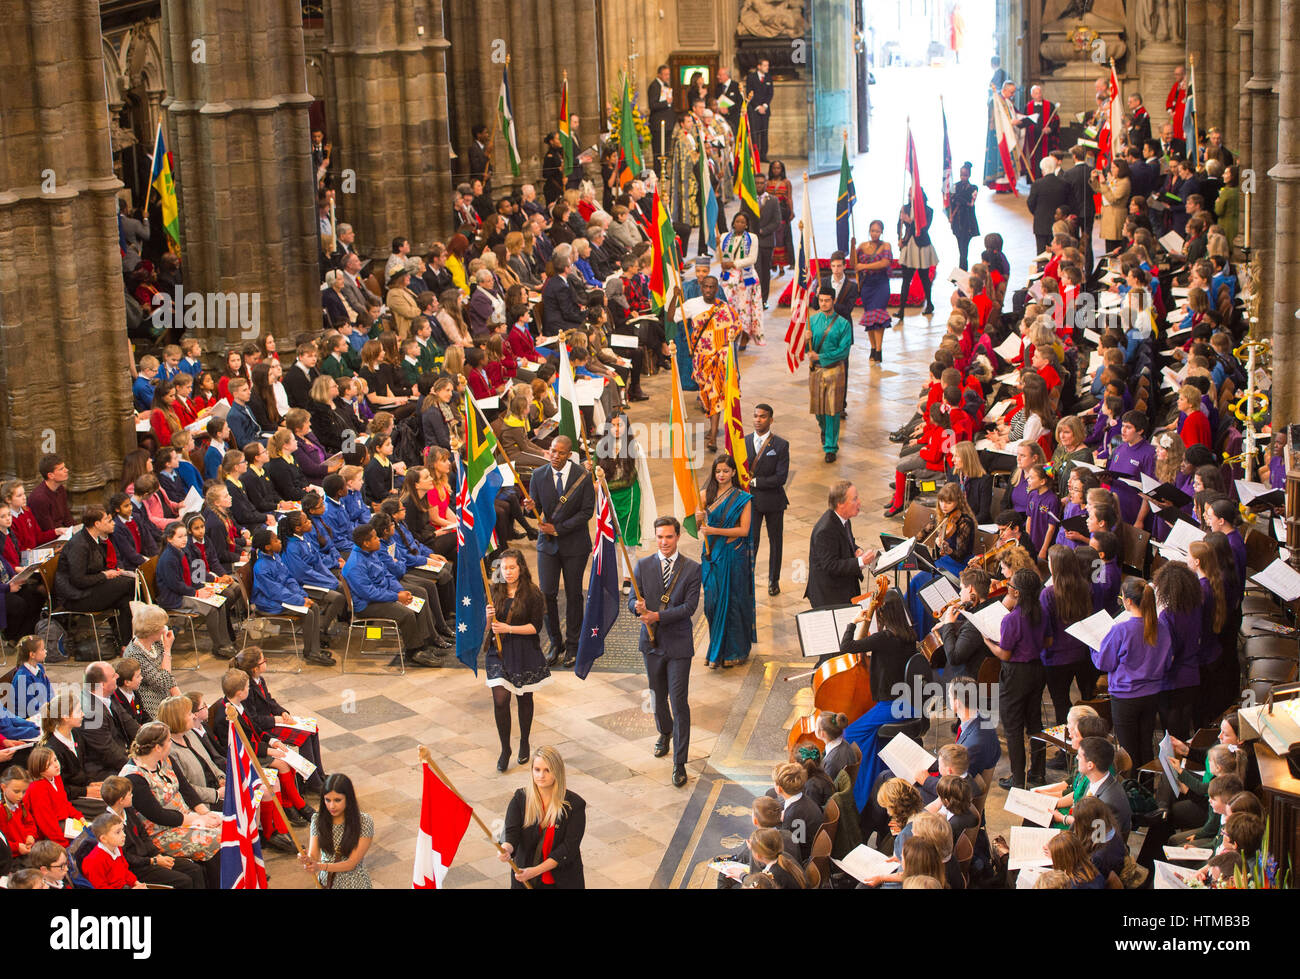 Flag bearers carry the flags of the commonwealth nations during the Commonwealth Service at Westminster Abbey, London. Stock Photo